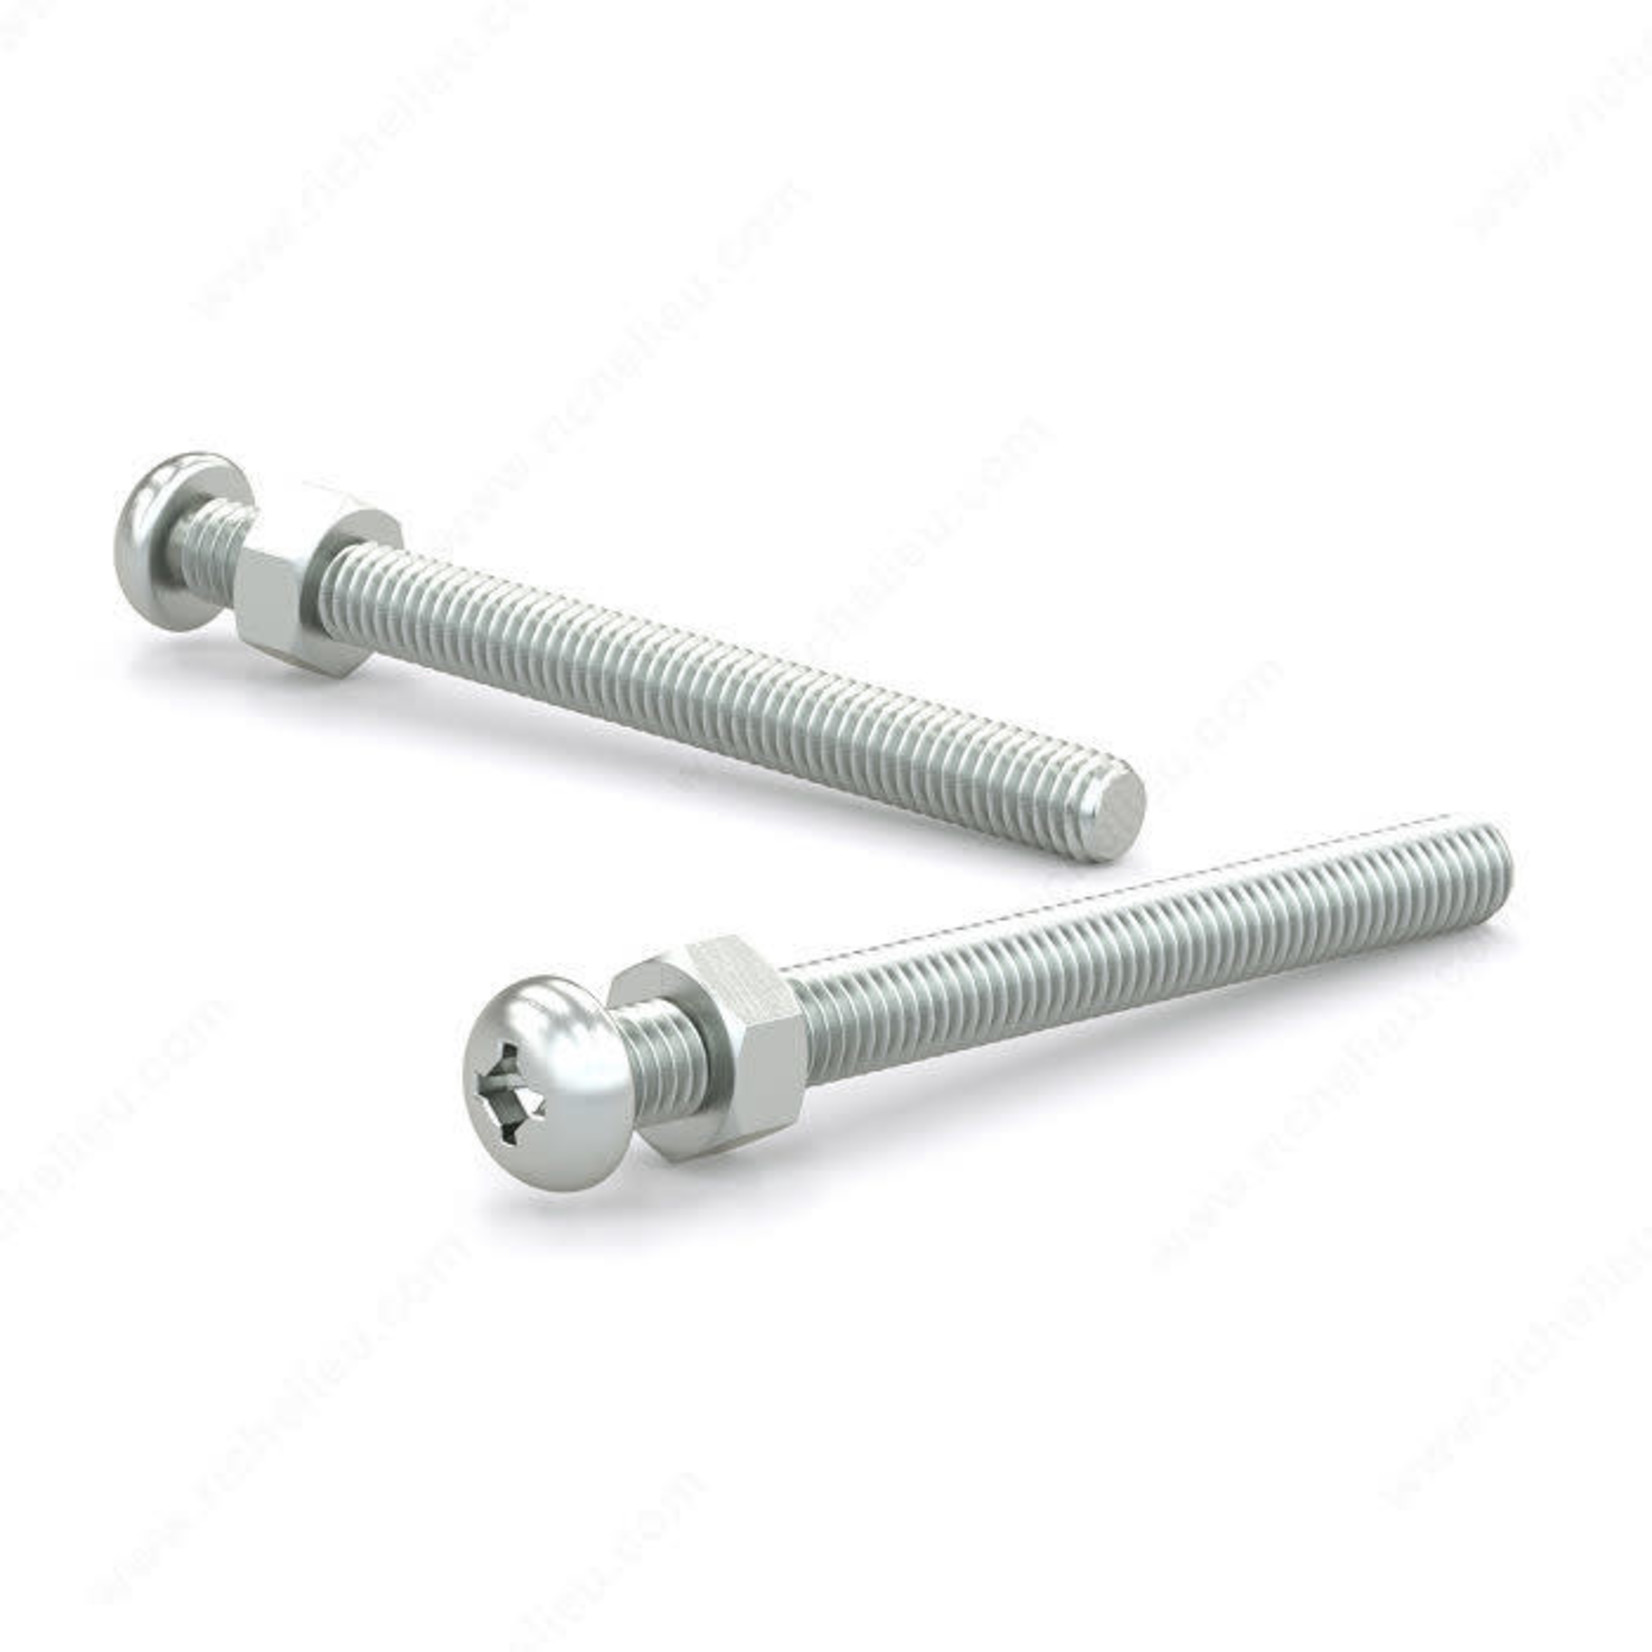 RELIABLE MACHINE SCREW WITH NUT, PAN HEAD, 10-32 1-3/4IN, 18PK BLISTER